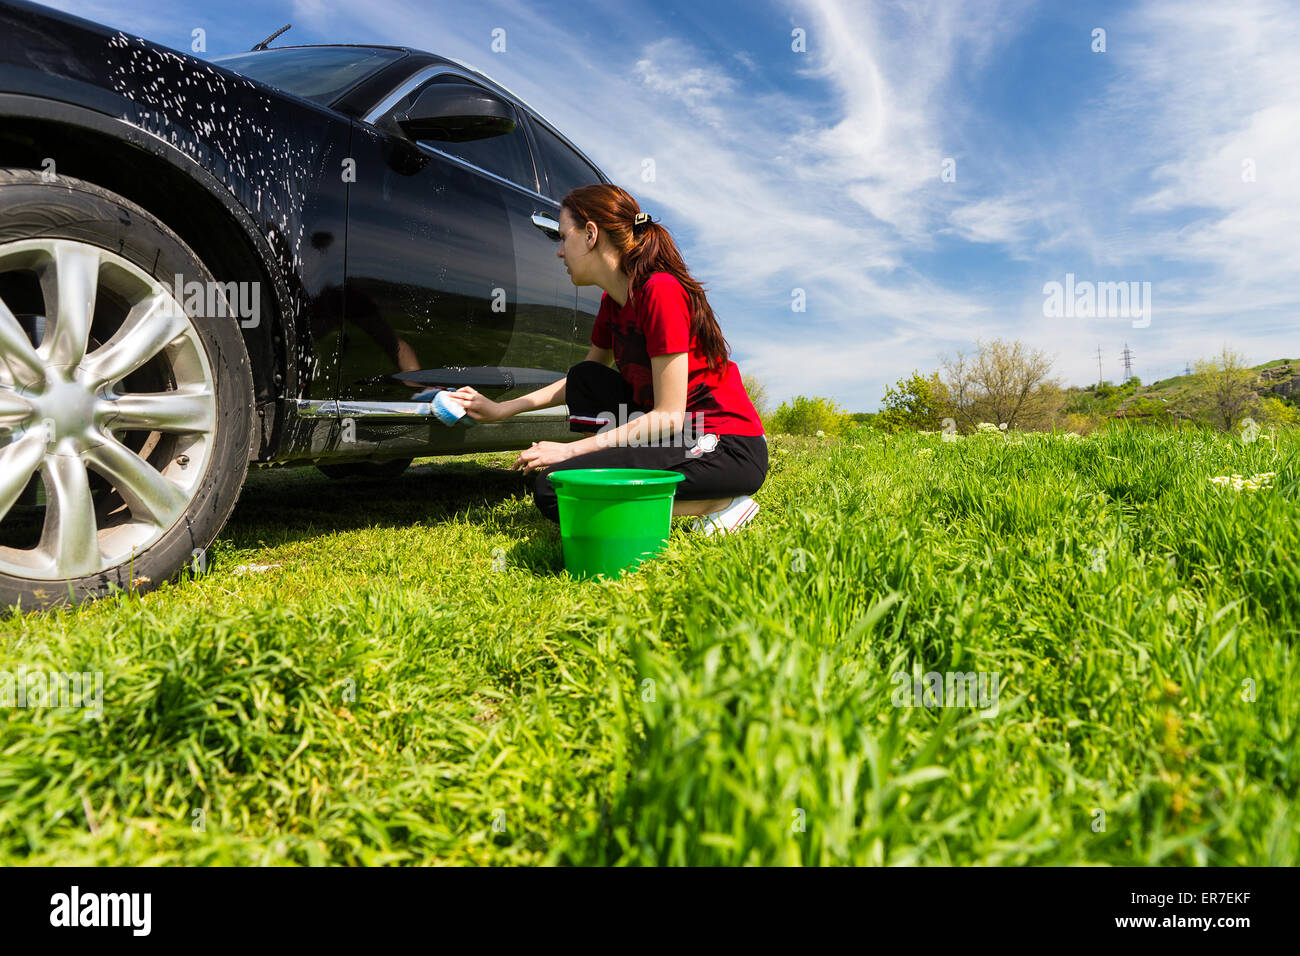 Woman Wearing Red T-Shirt Washing Black Vehicle in Field, Crouching Next to Green Bucket Wringing Soapy Sponge on Bright Sunny Day. Stock Photo